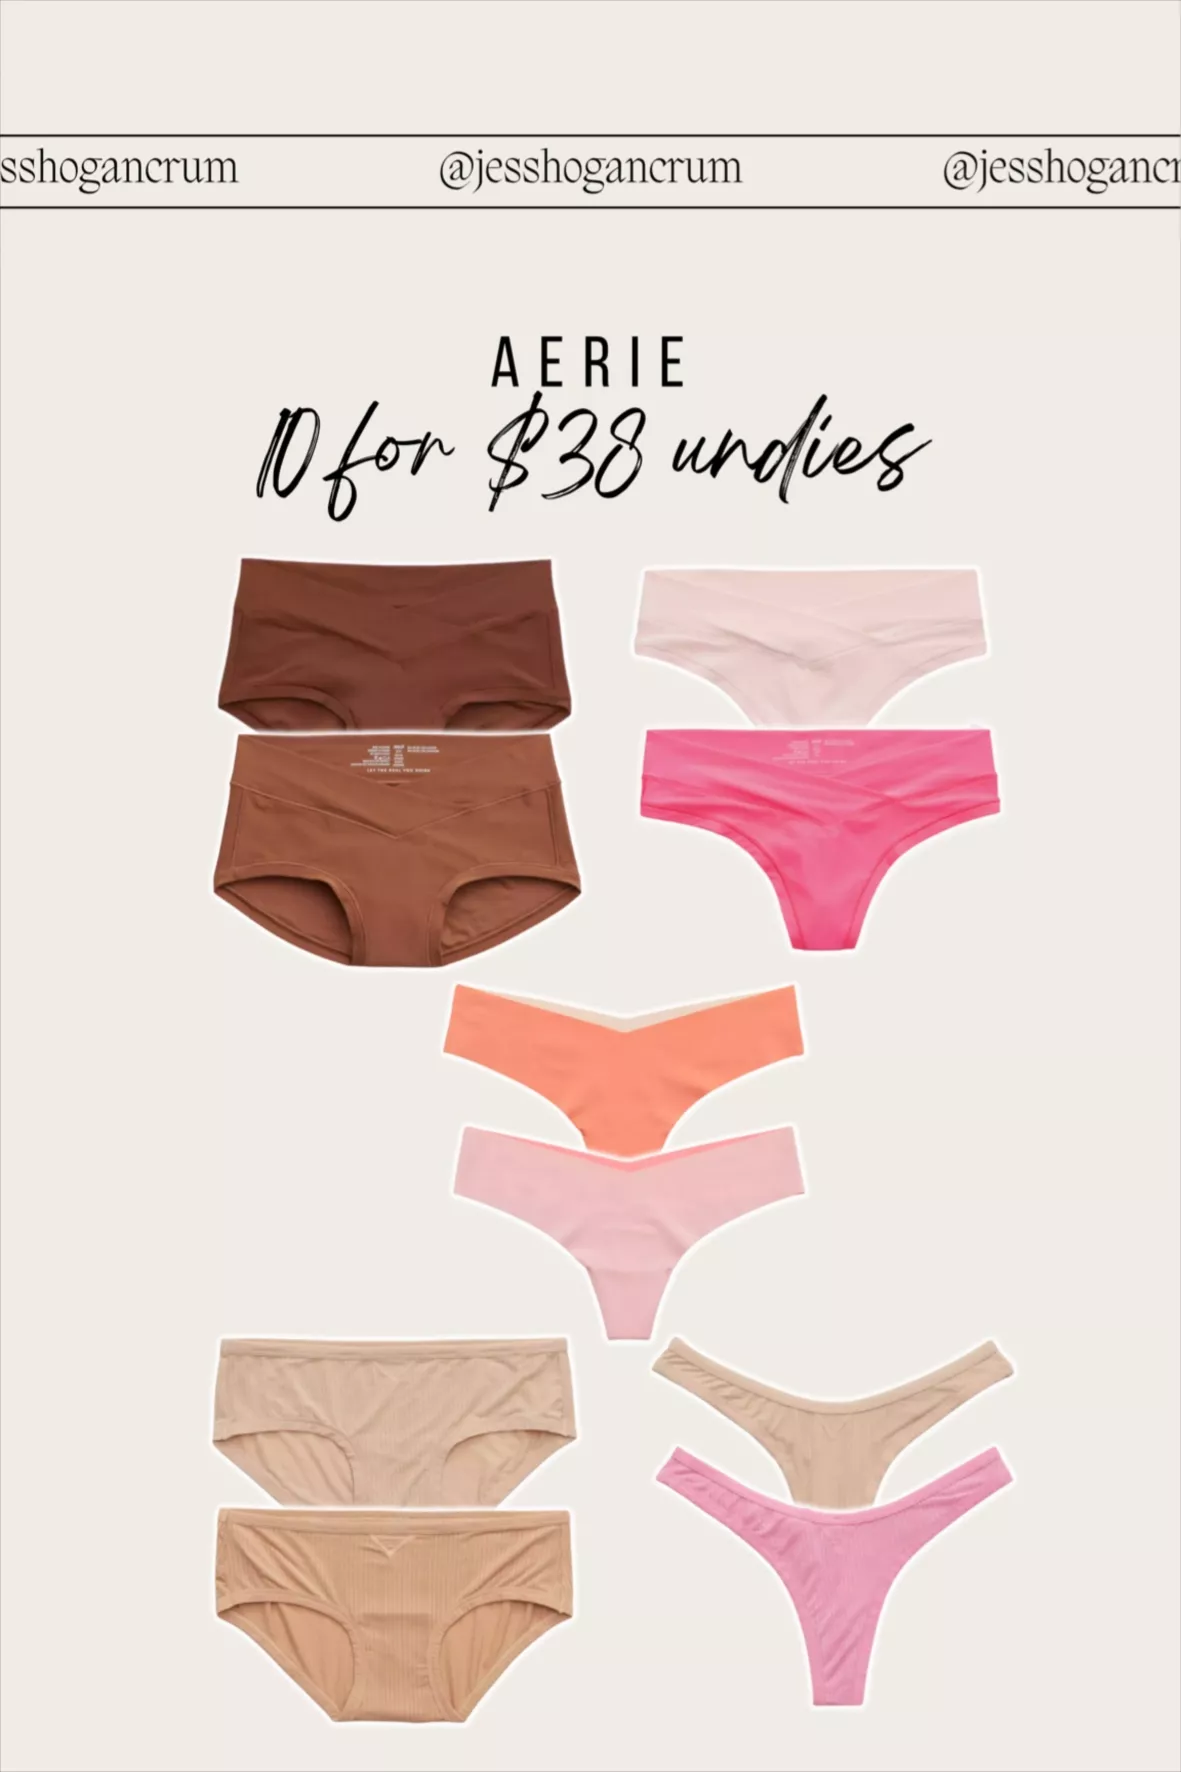 Aerie - NEW undies online + TWO extra days to get them ALL 10 for $31!